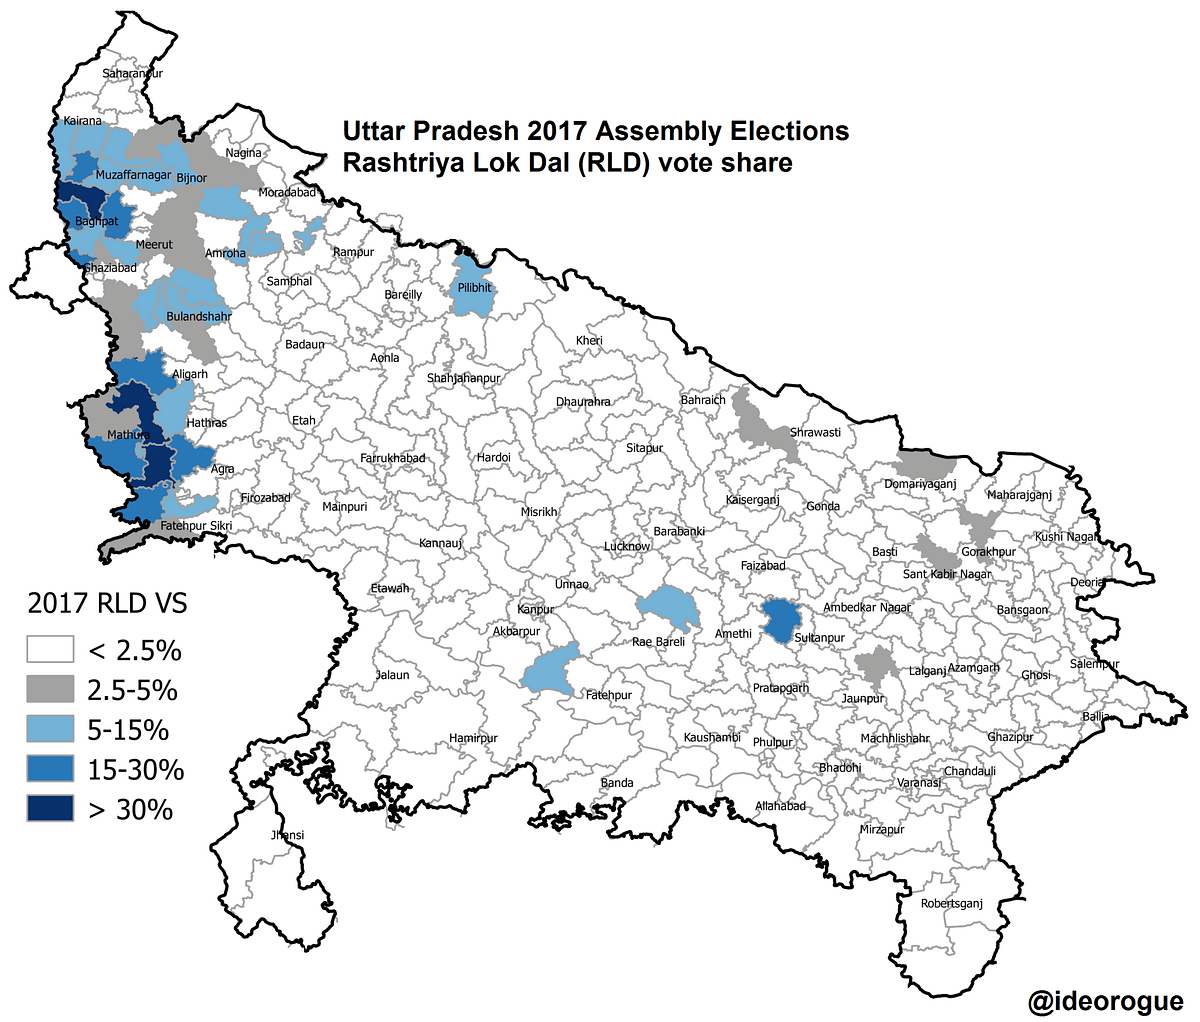 Map 2: RLD vote share in UP assembly elections 2017